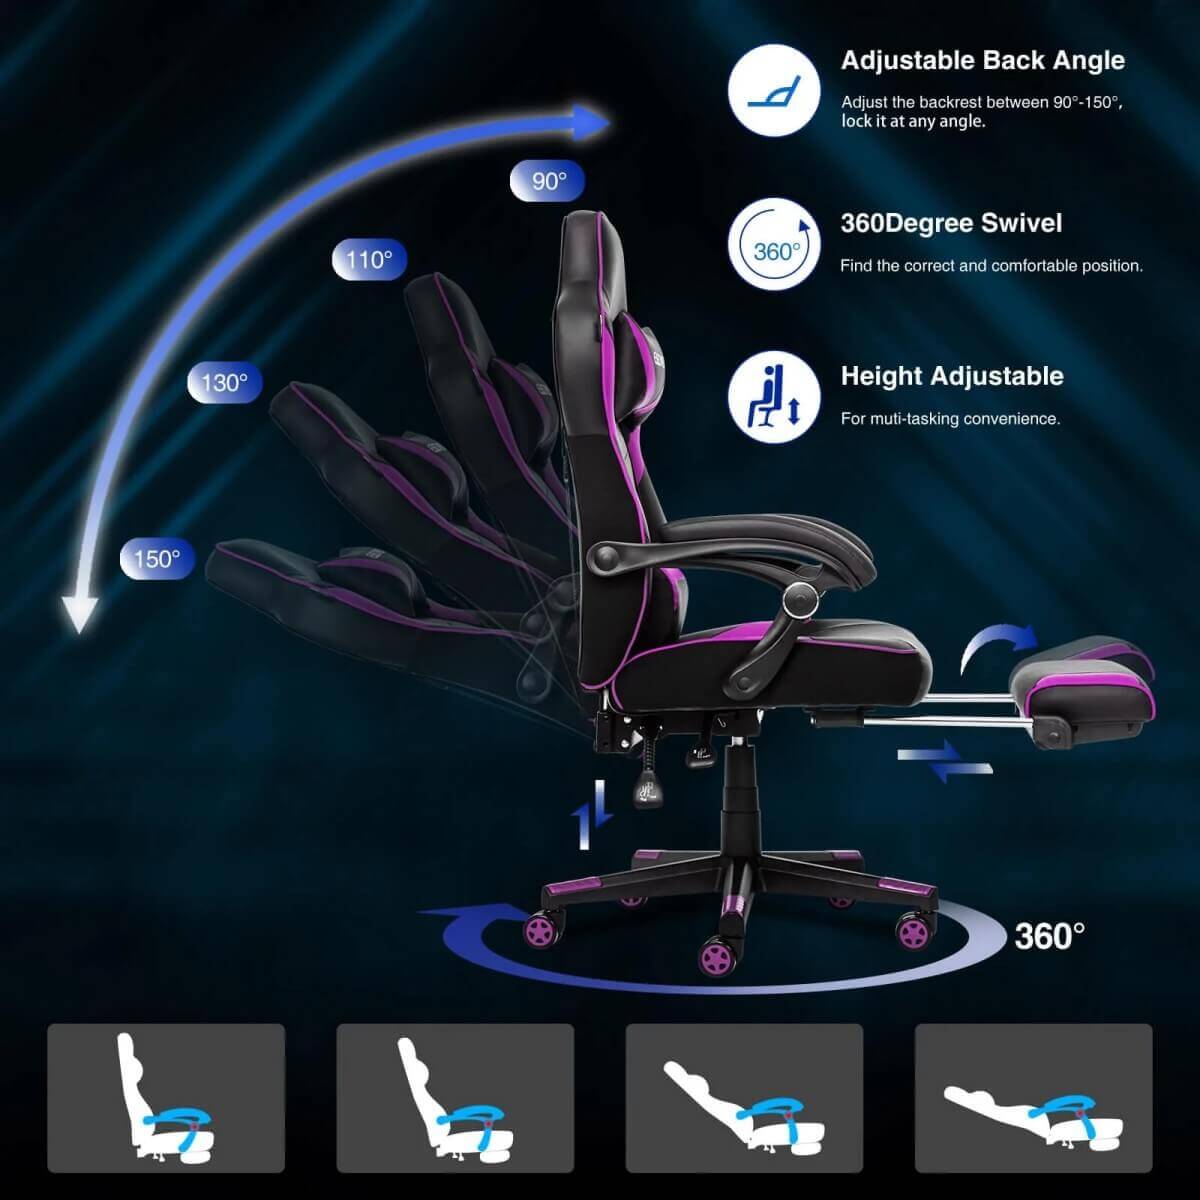 Elecwish Video Game Chairs Purple Gaming Chair With Footrest OC087 can adjustback angle, height and have 360 degree swivel